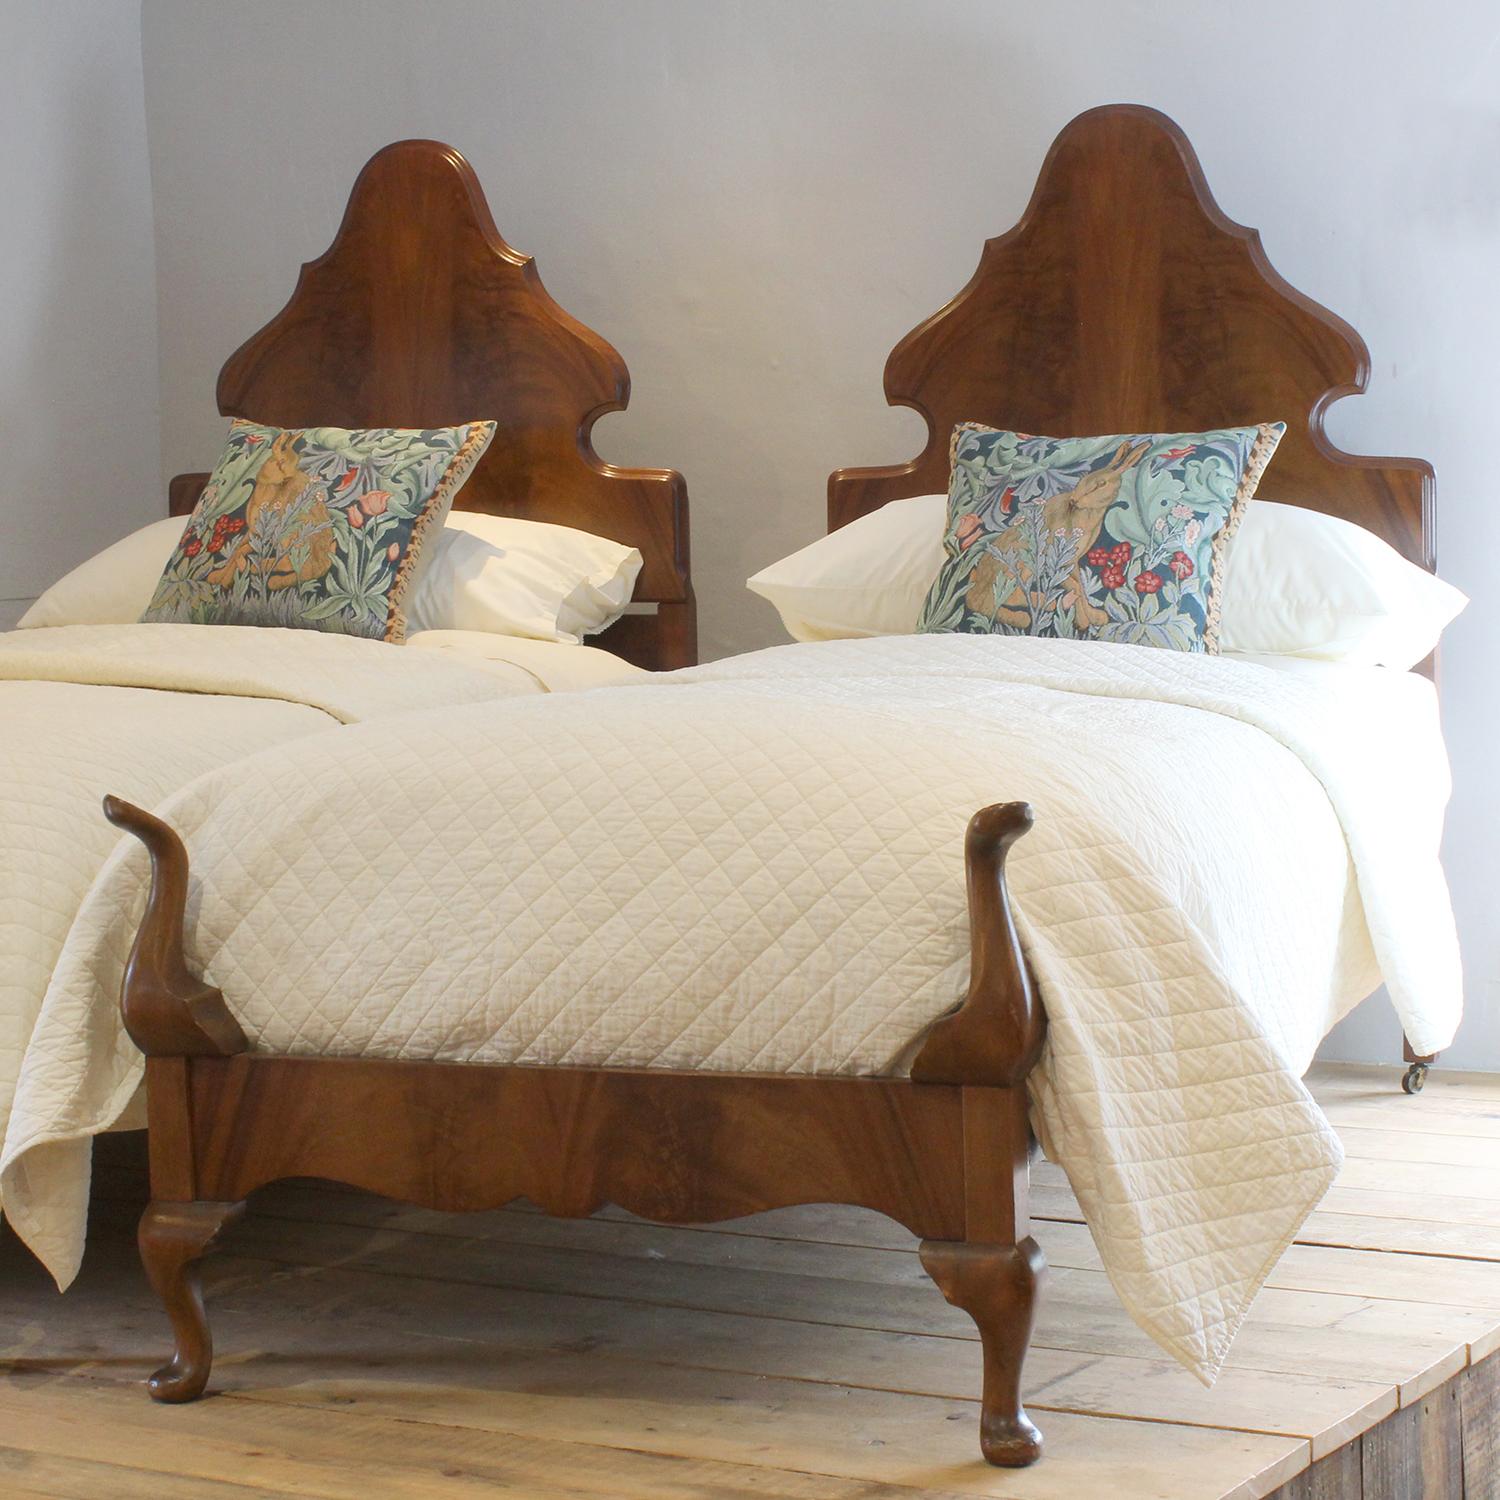 A fine matching pair of antique single beds in mahogany with flame mahogany veneer panels.
The beds accept wide single size bases and mattresses, 3ft wide (36 inches)
The price includes two standard firm bed bases to support the mattresses. 
The